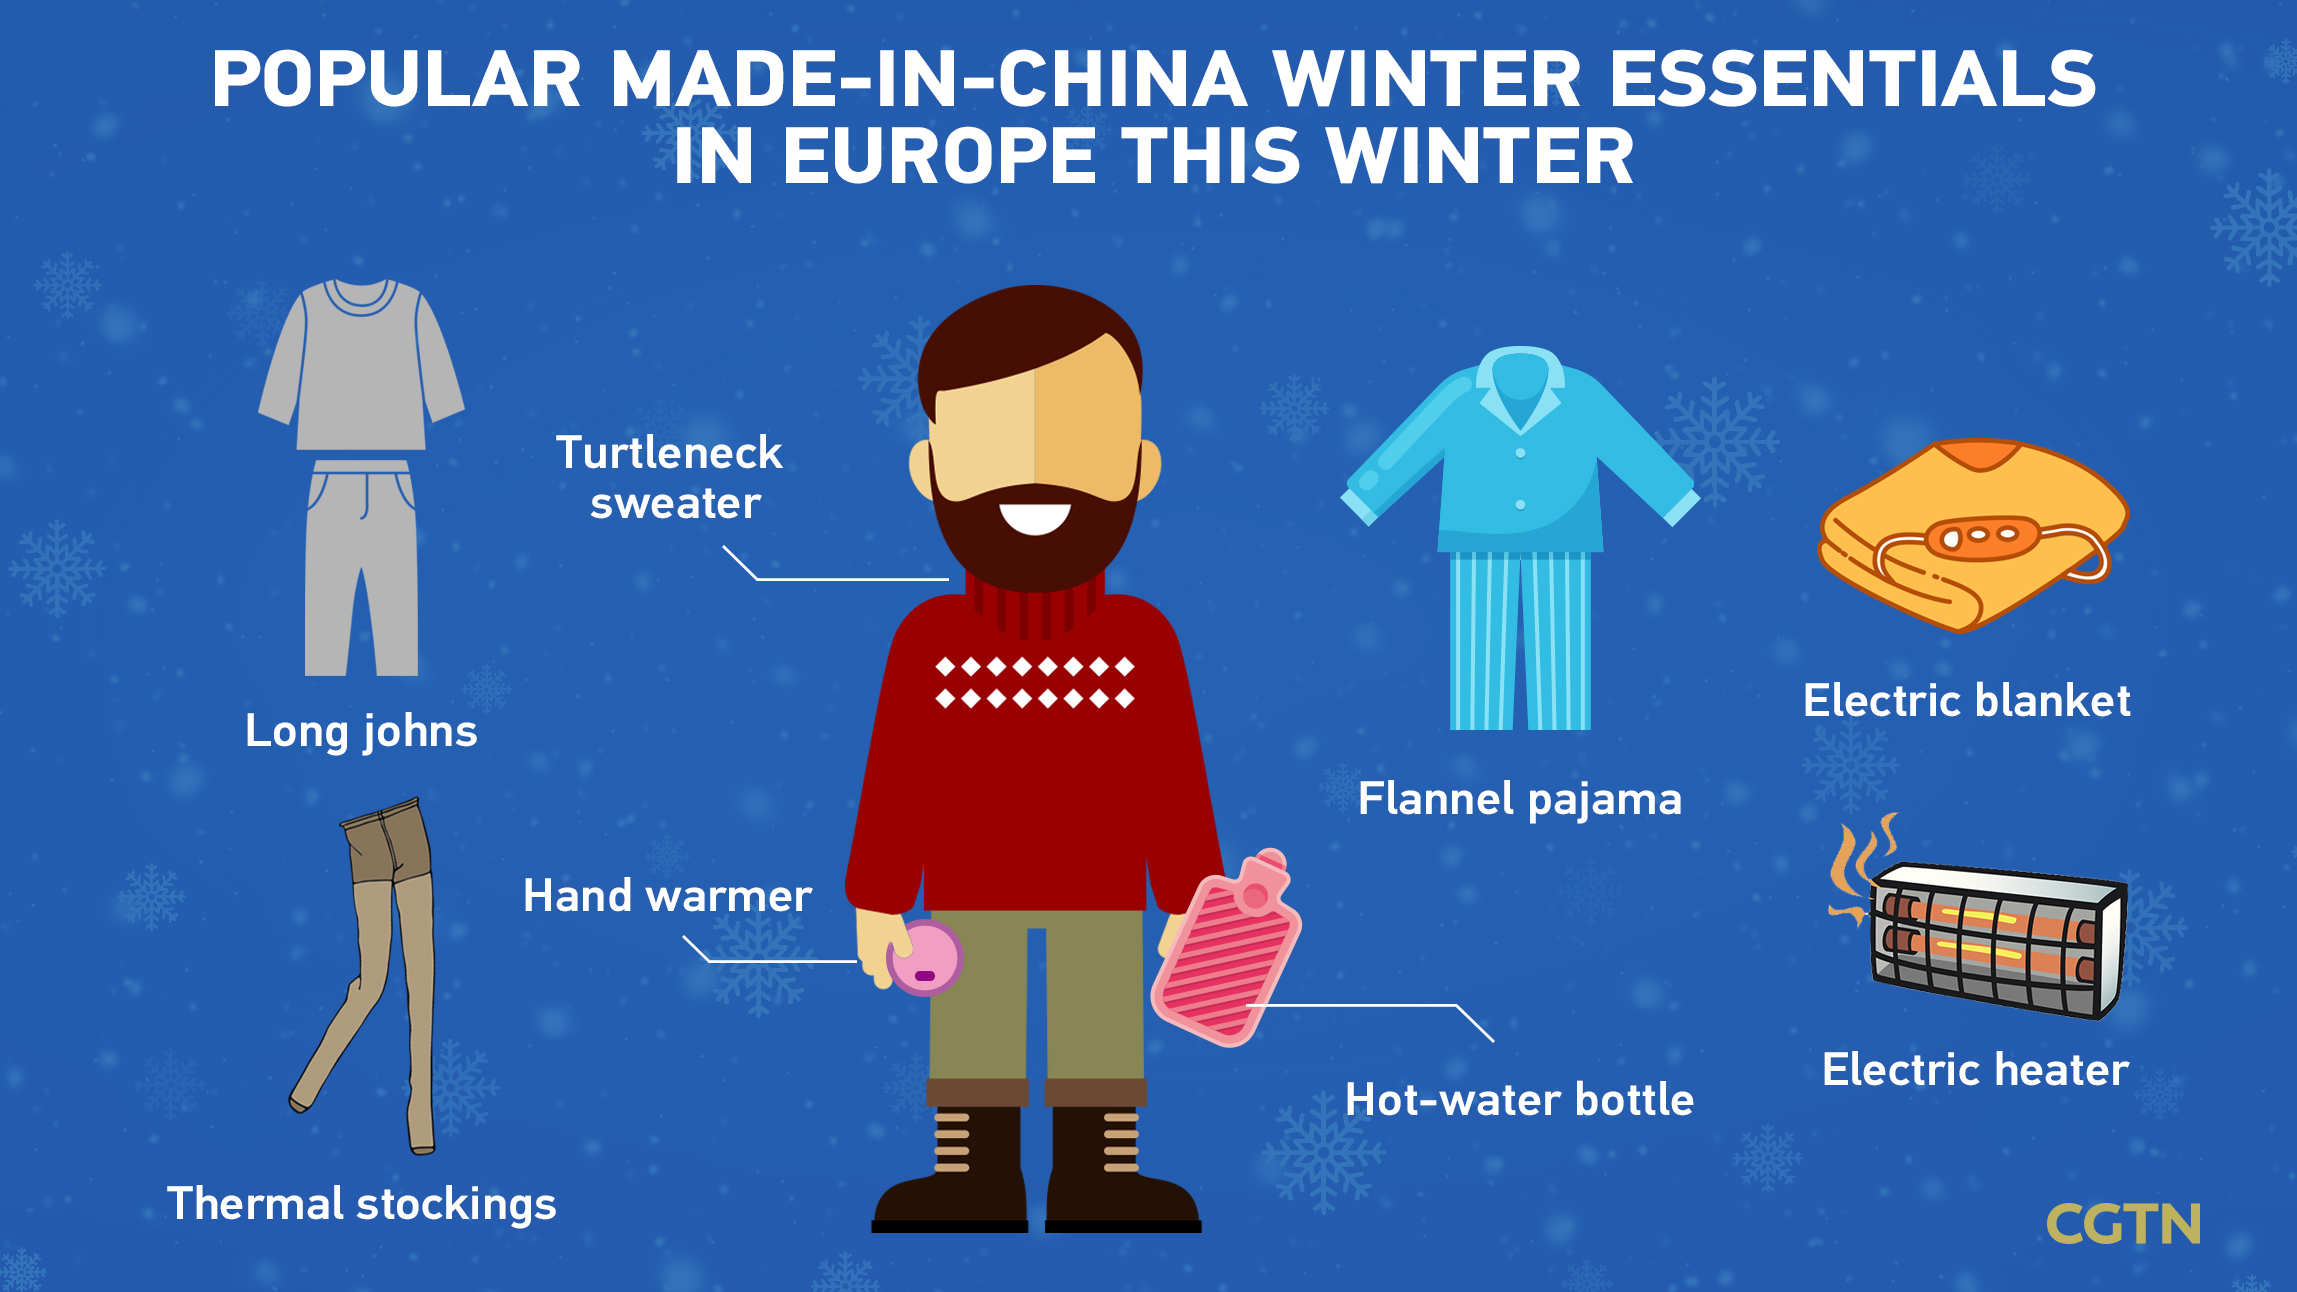 Electric blankets and other 'shenqi' are keeping Europe warm this winter